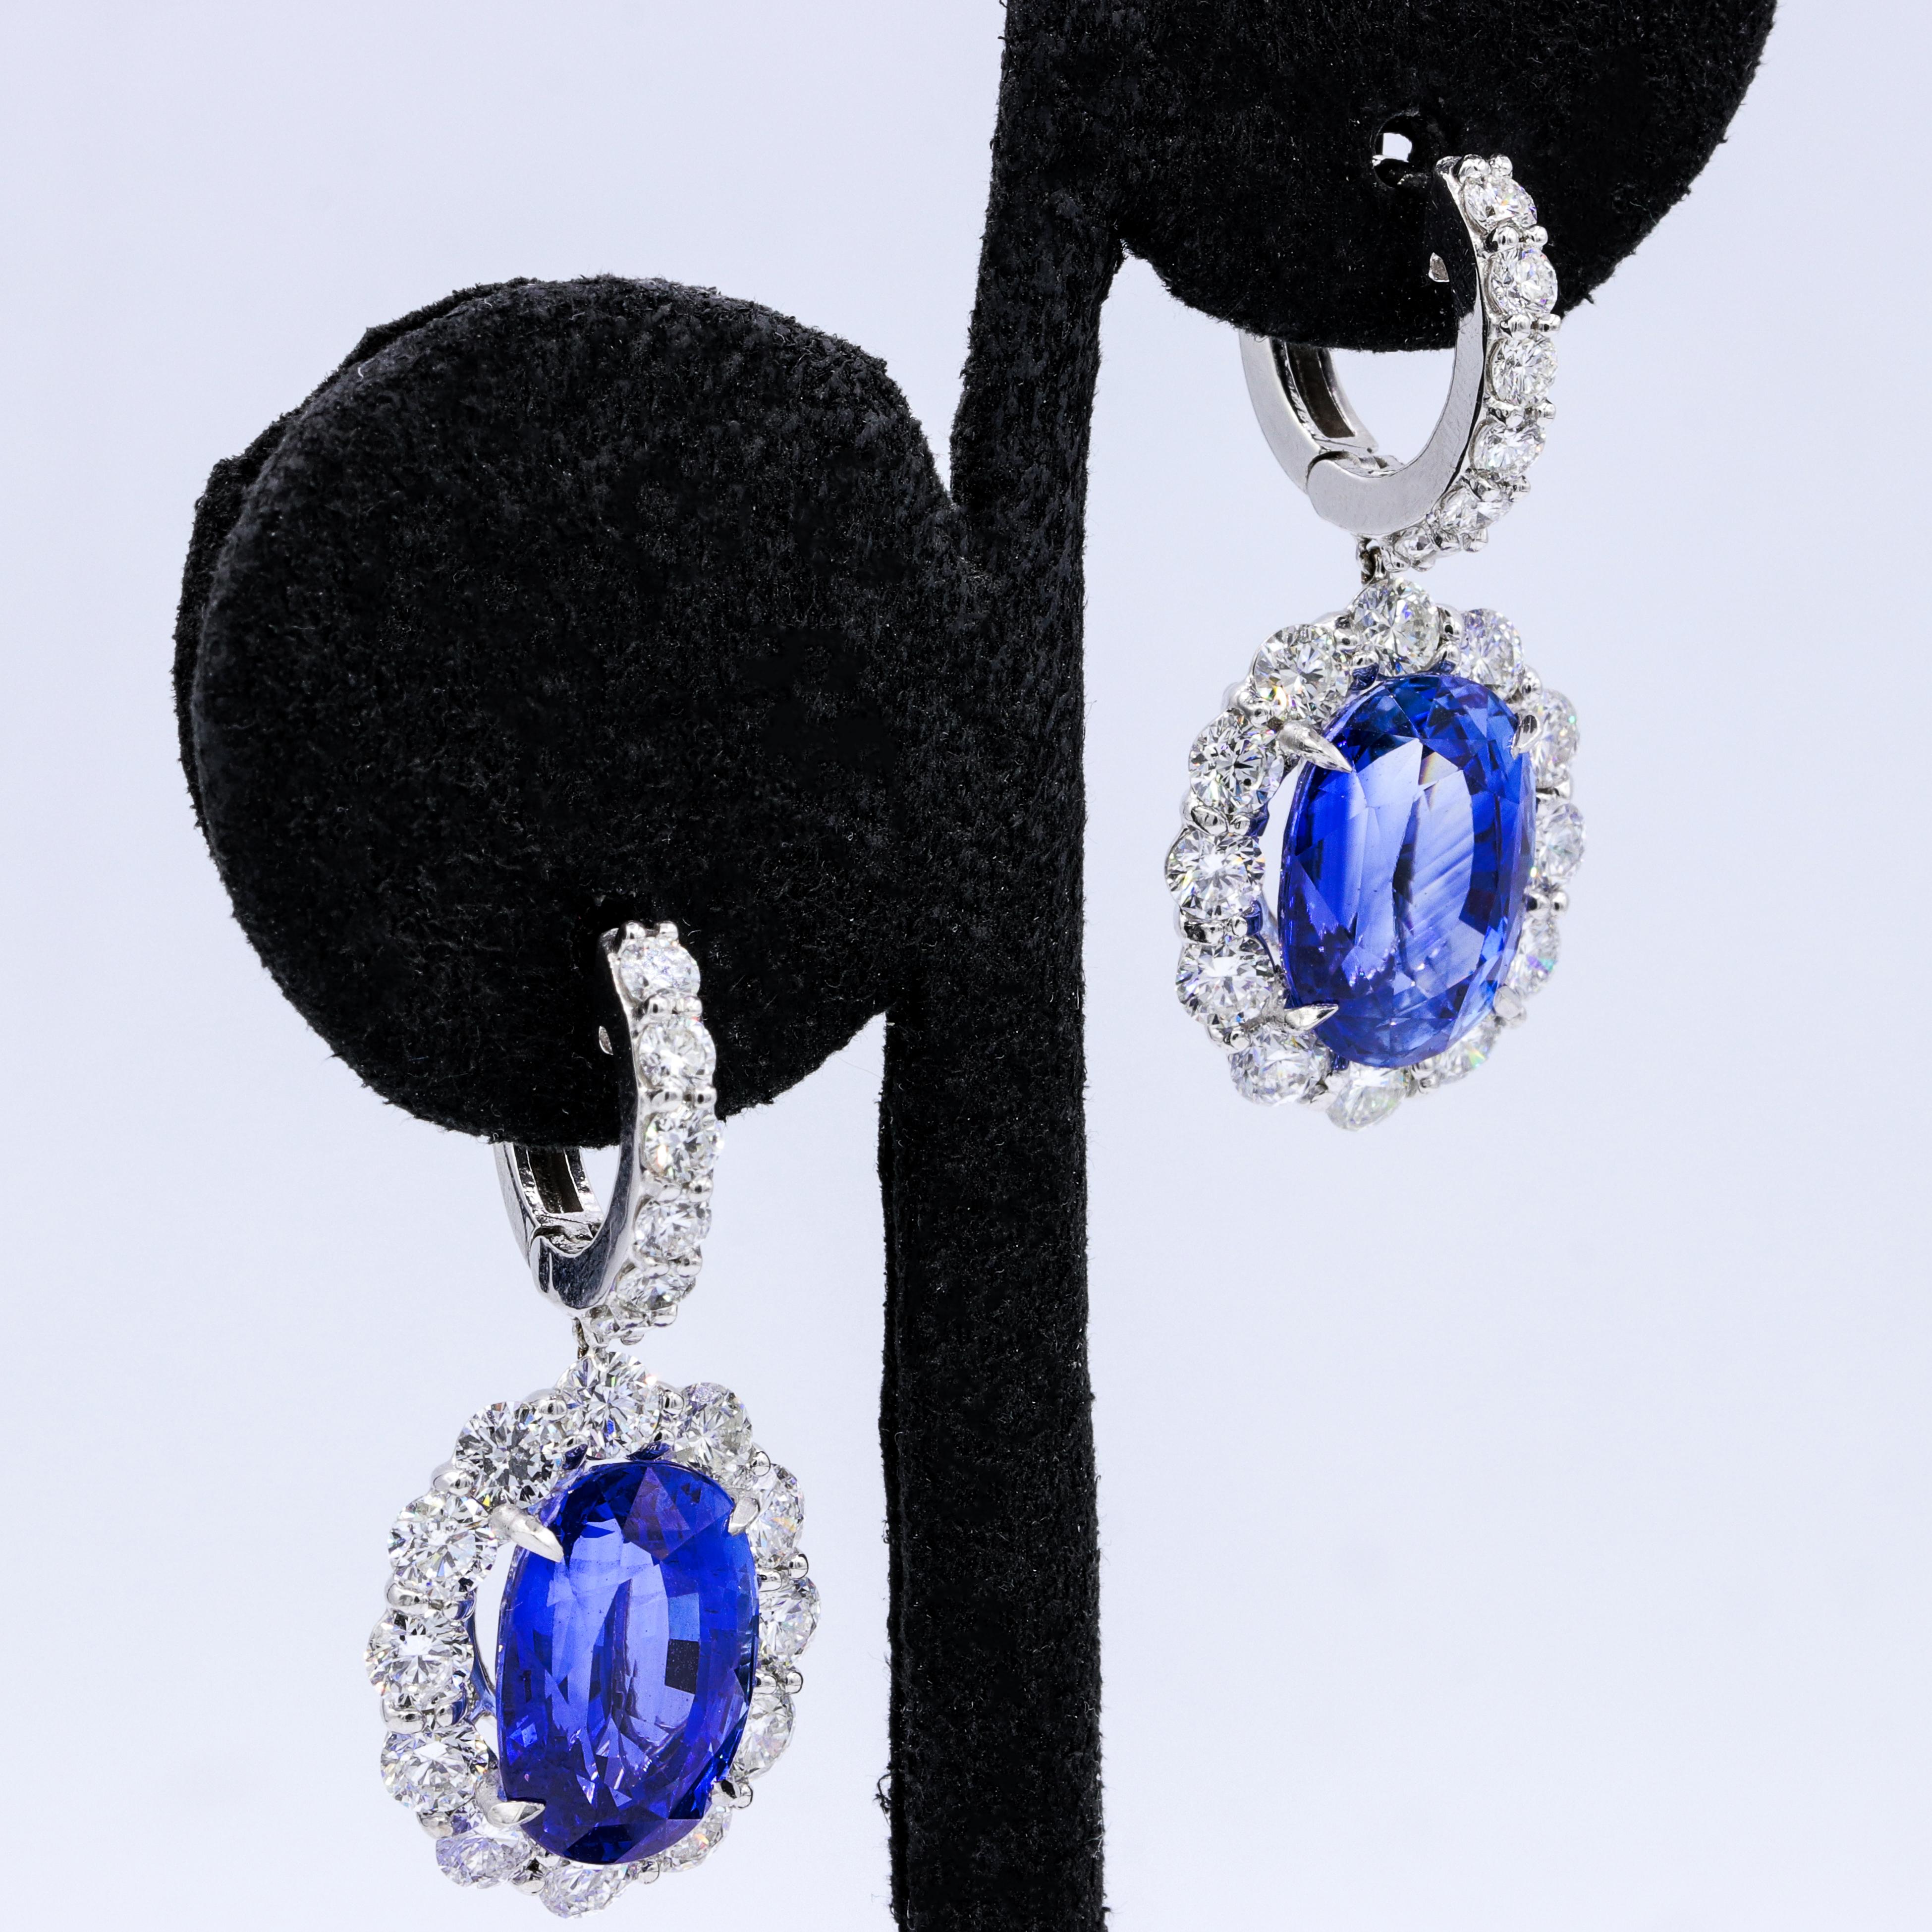 Oval Cut Diana M. Sapphire Diamond Earring with GIA Certified Violetish Blue Sapphires